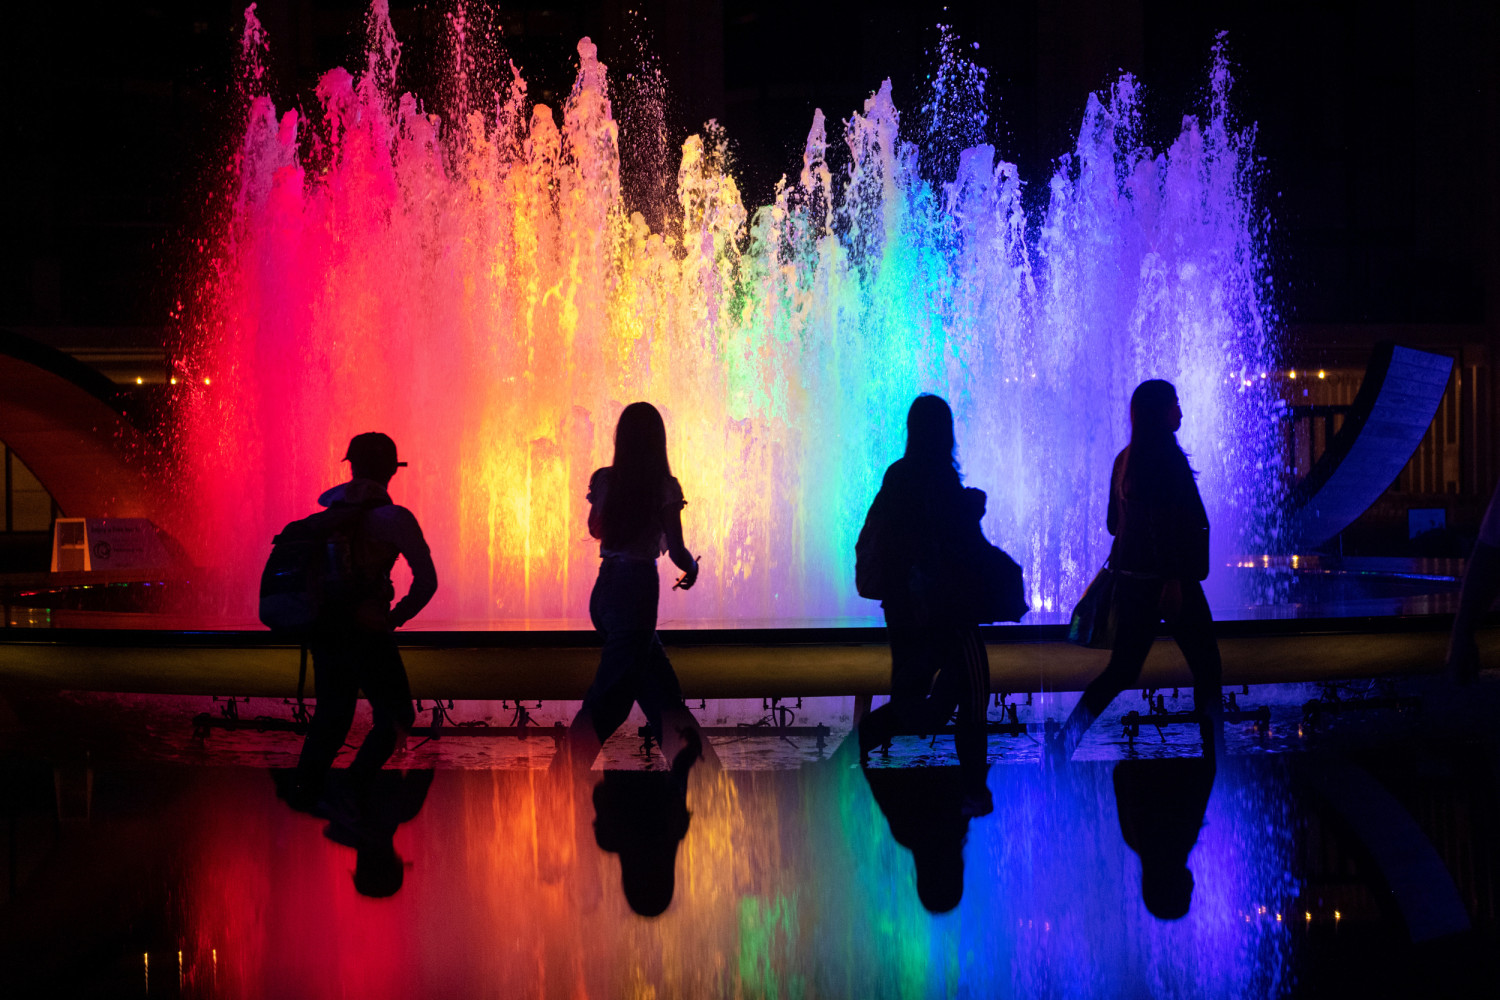 Cathedral of St. John the Divine Lights Up Rainbow Columns for Pride Month